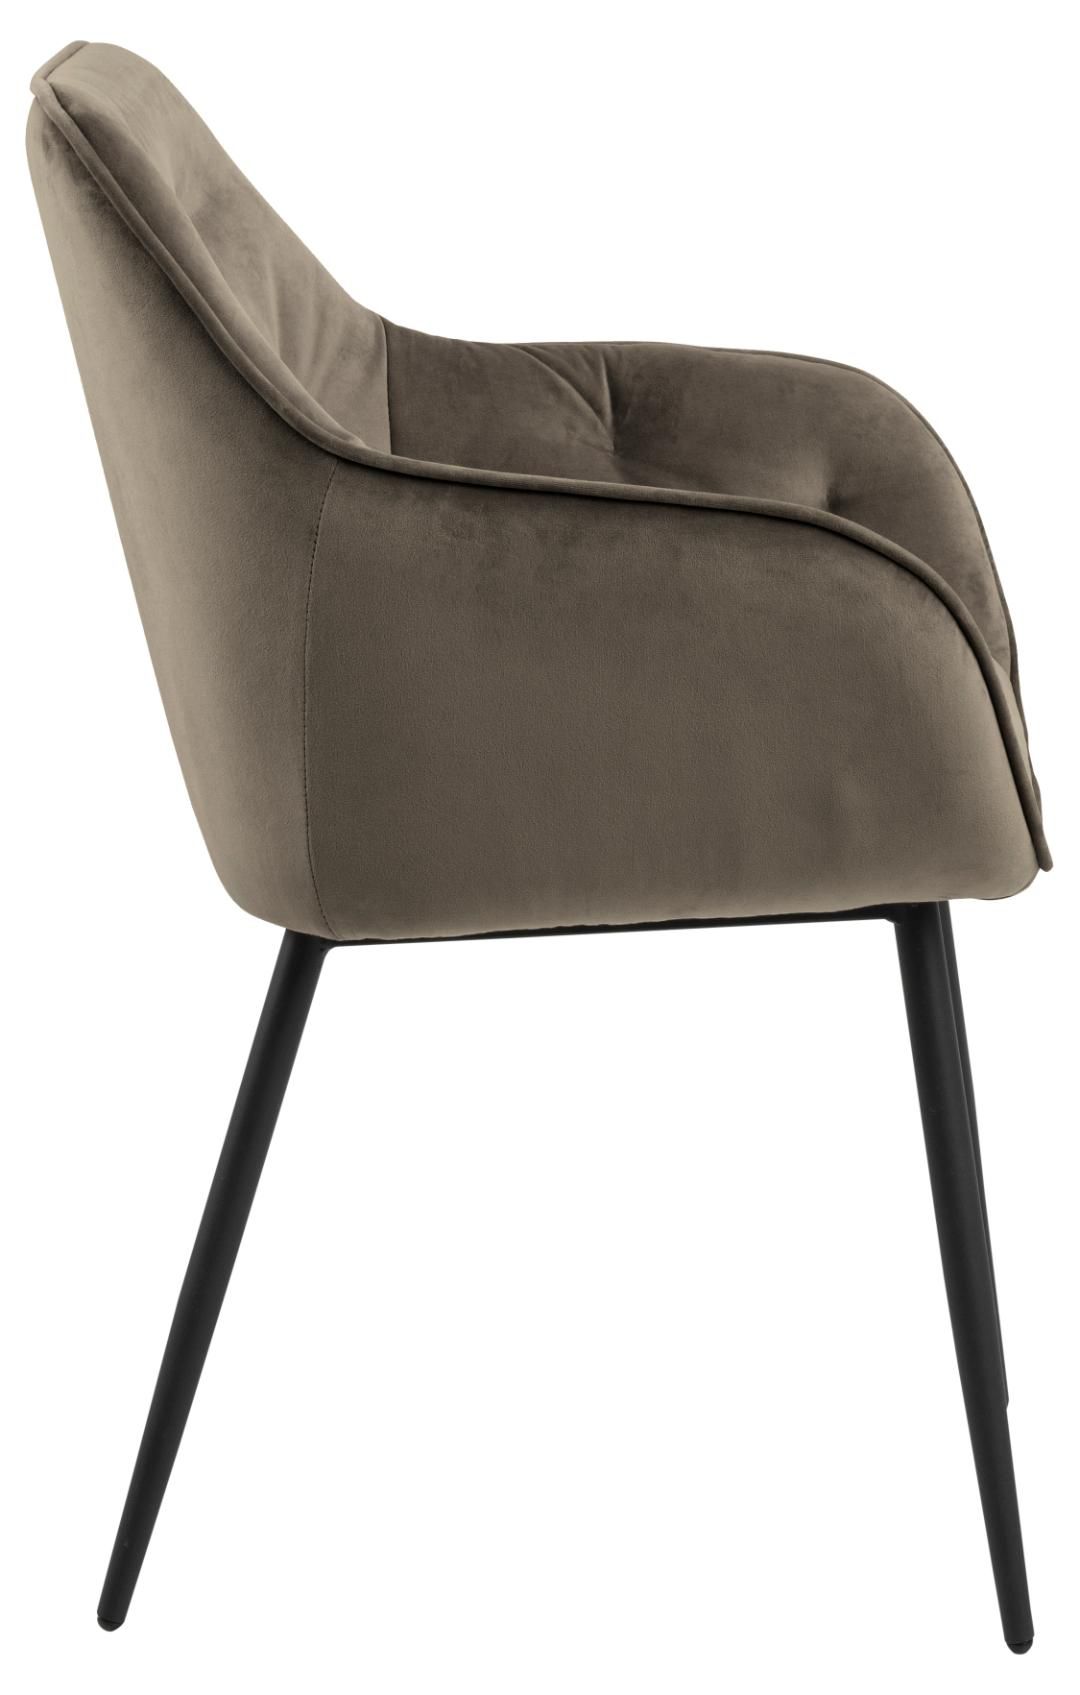 Brooke dining chair with armrest / Outlet